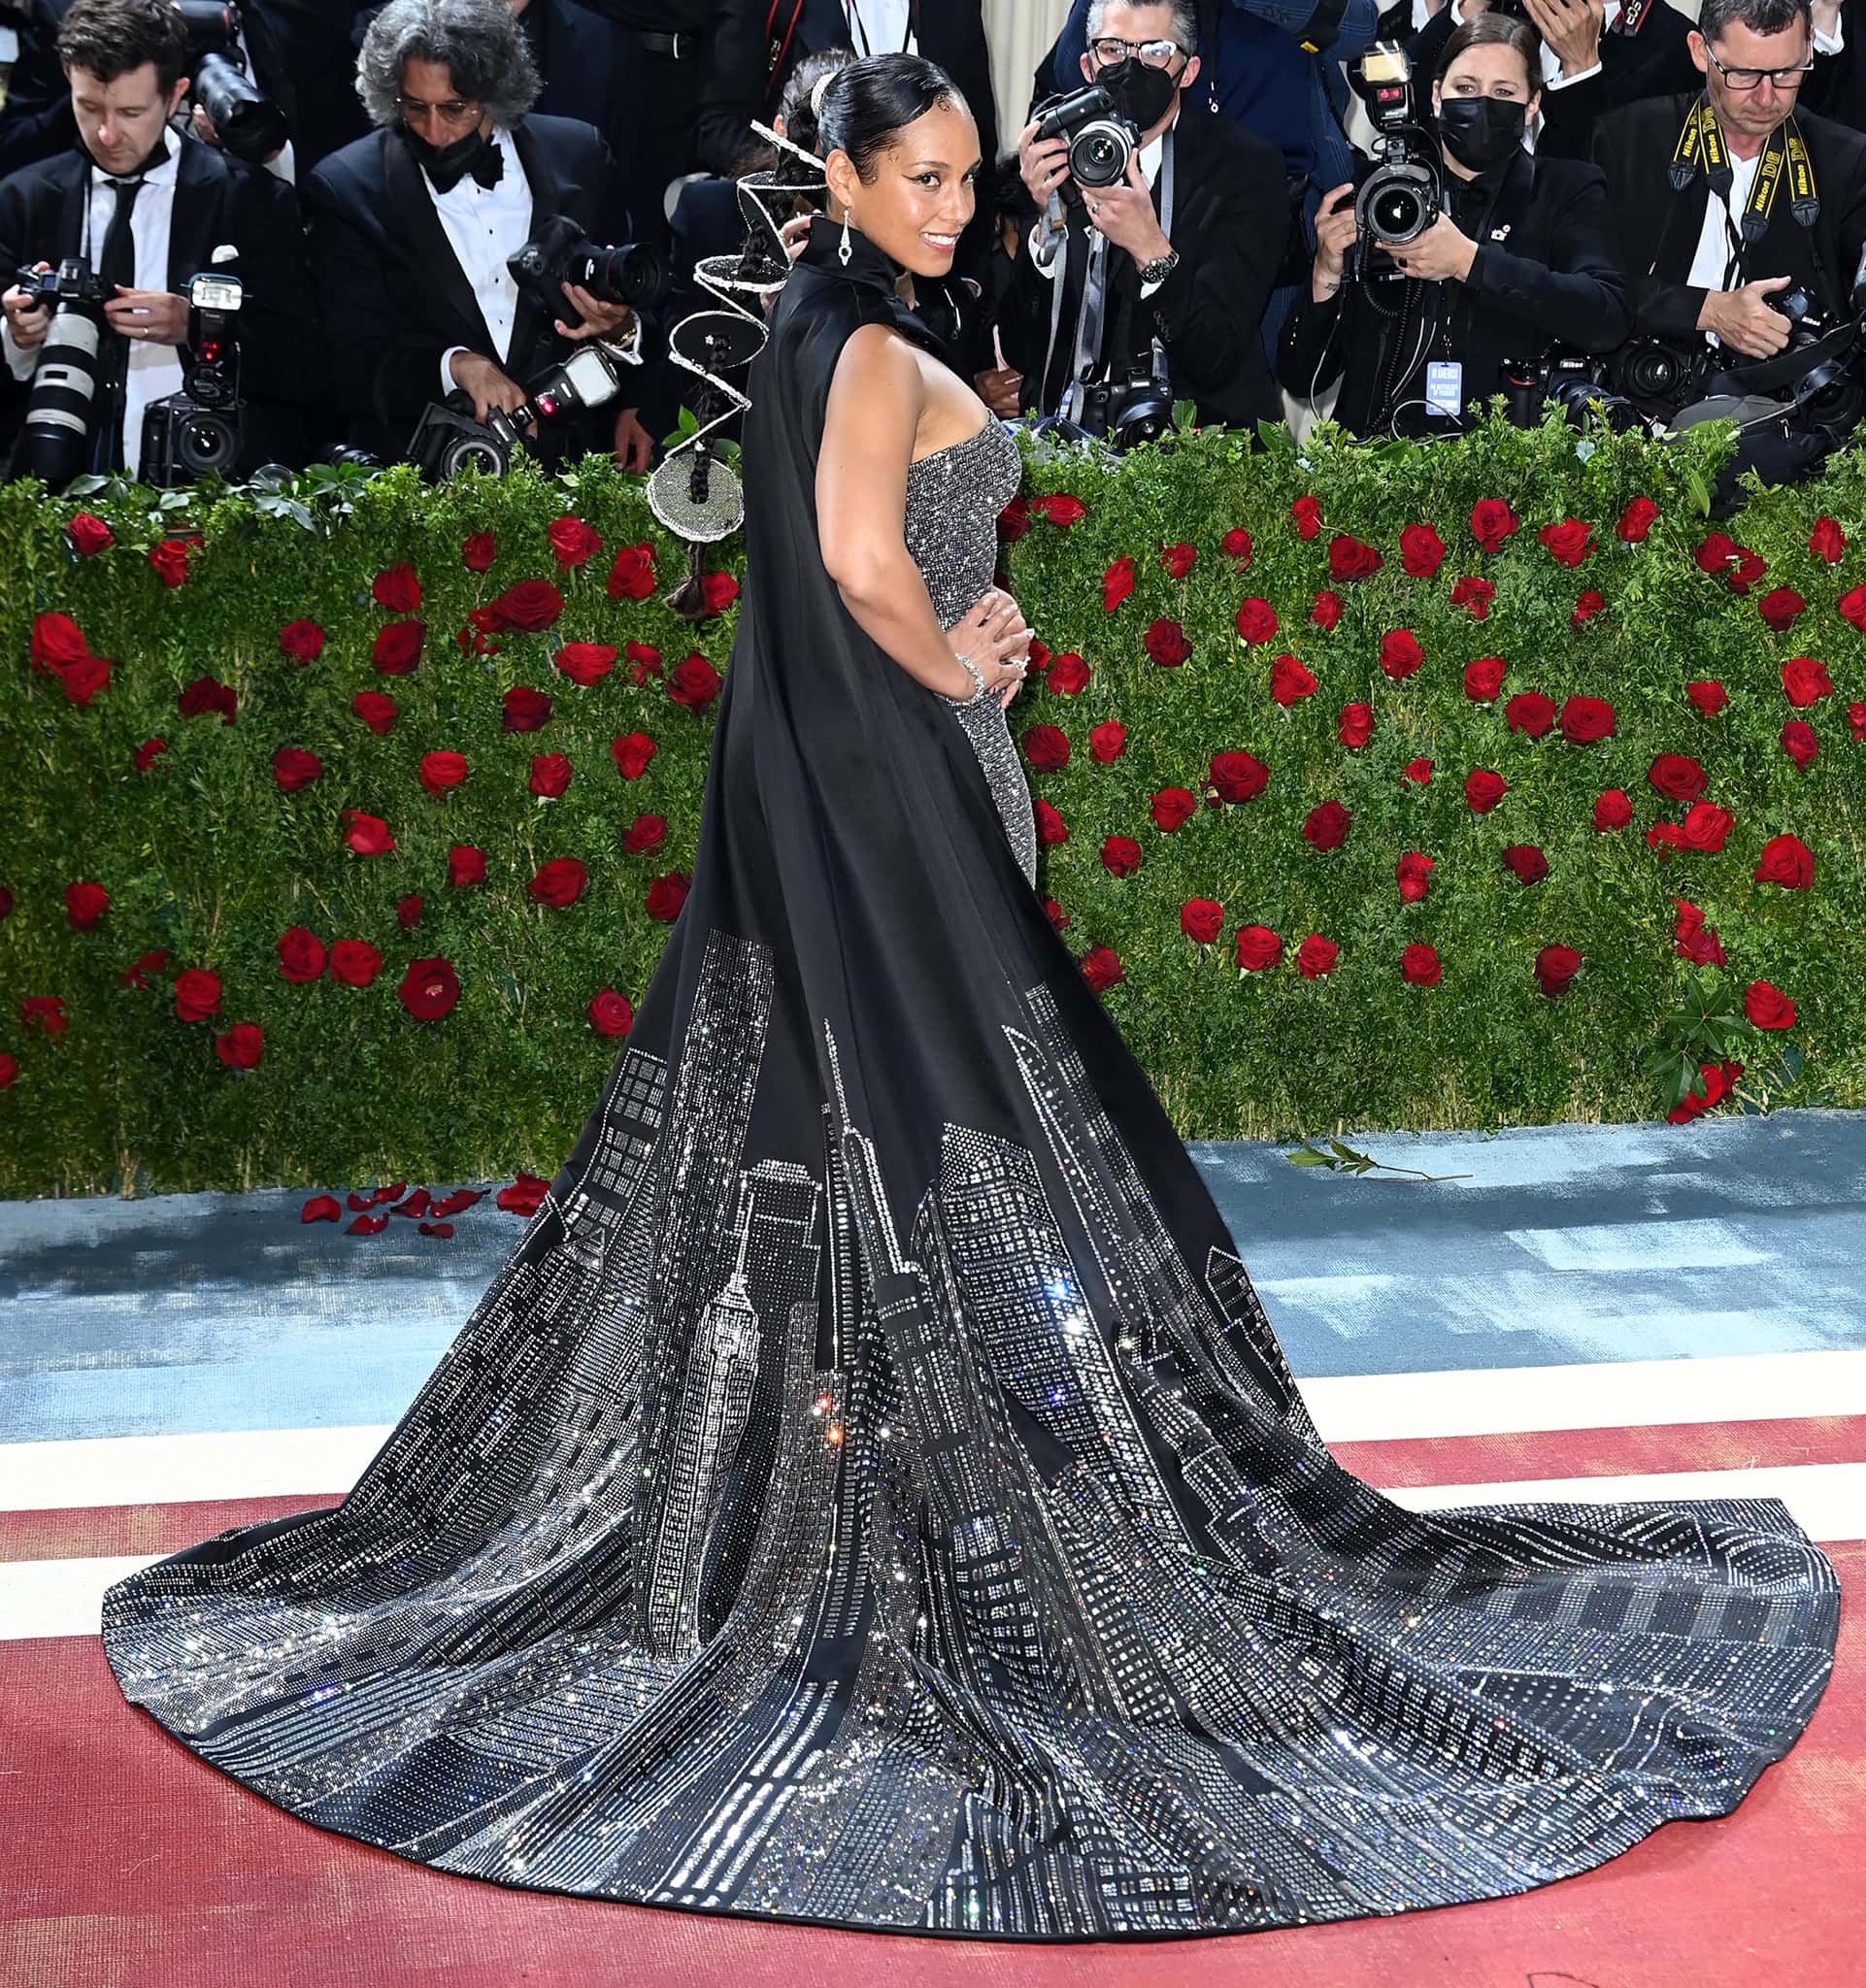 Alicia Keys honors her home city in a Ralph Lauren cape, designed with bedazzled New York City skyline at the 2022 Met Gala